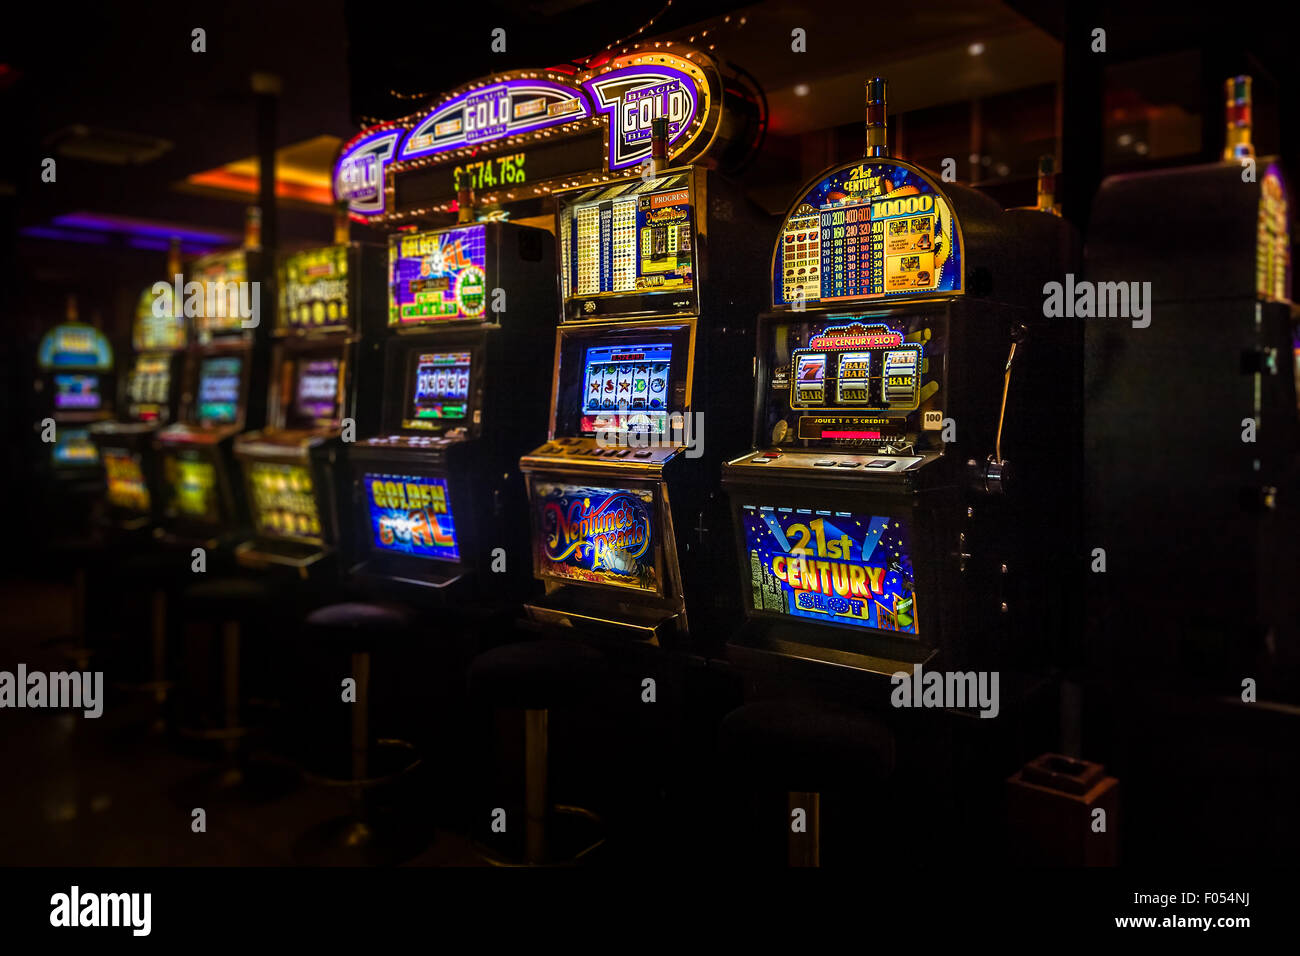 Slot machines in the casino of a luxury hotel Stock Photo